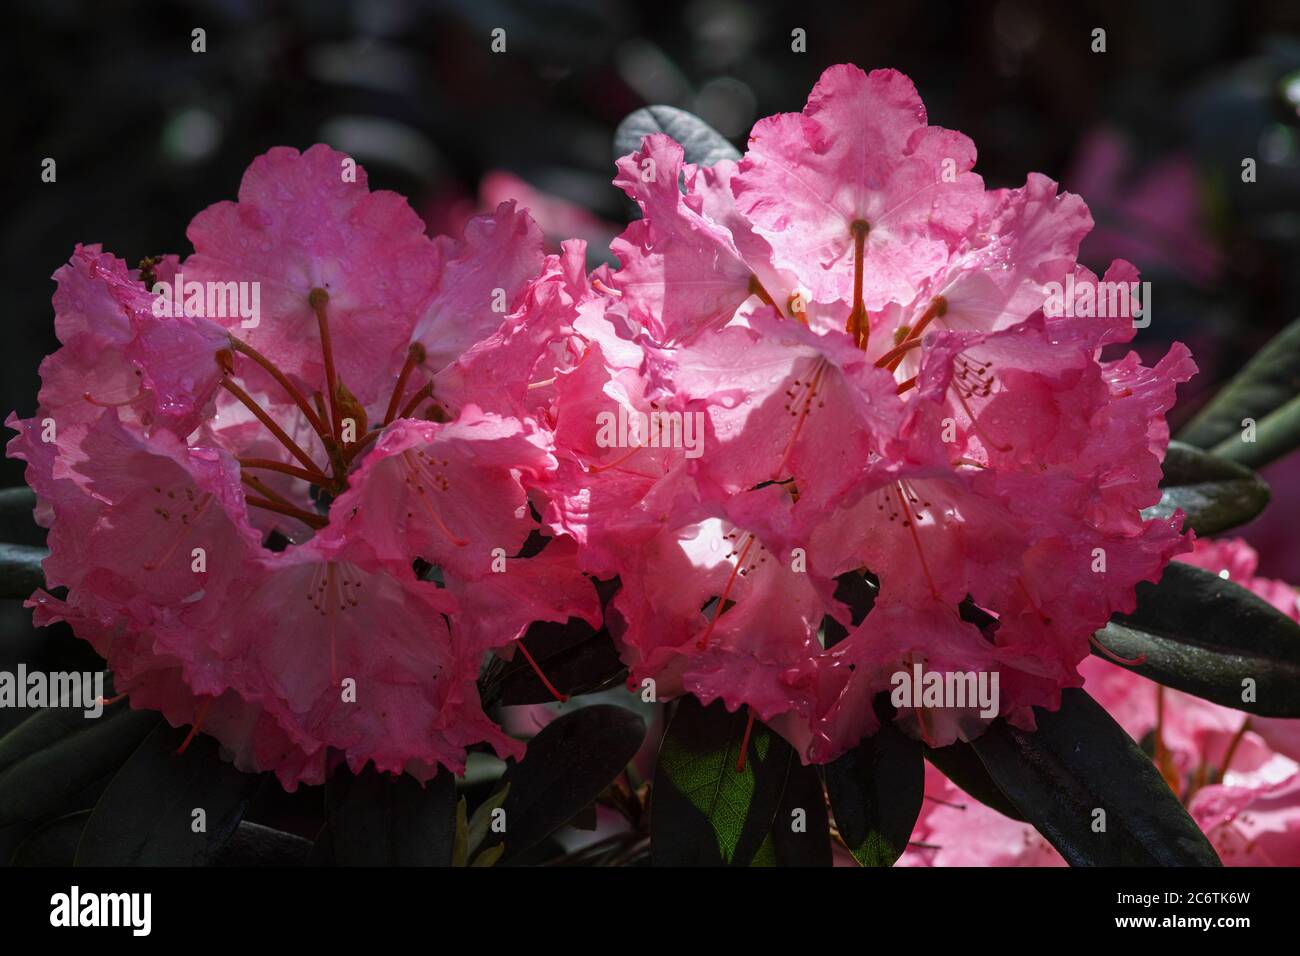 Catawba Rhododendron Cultivar (Rhododendron catawbiense) Stock Photo